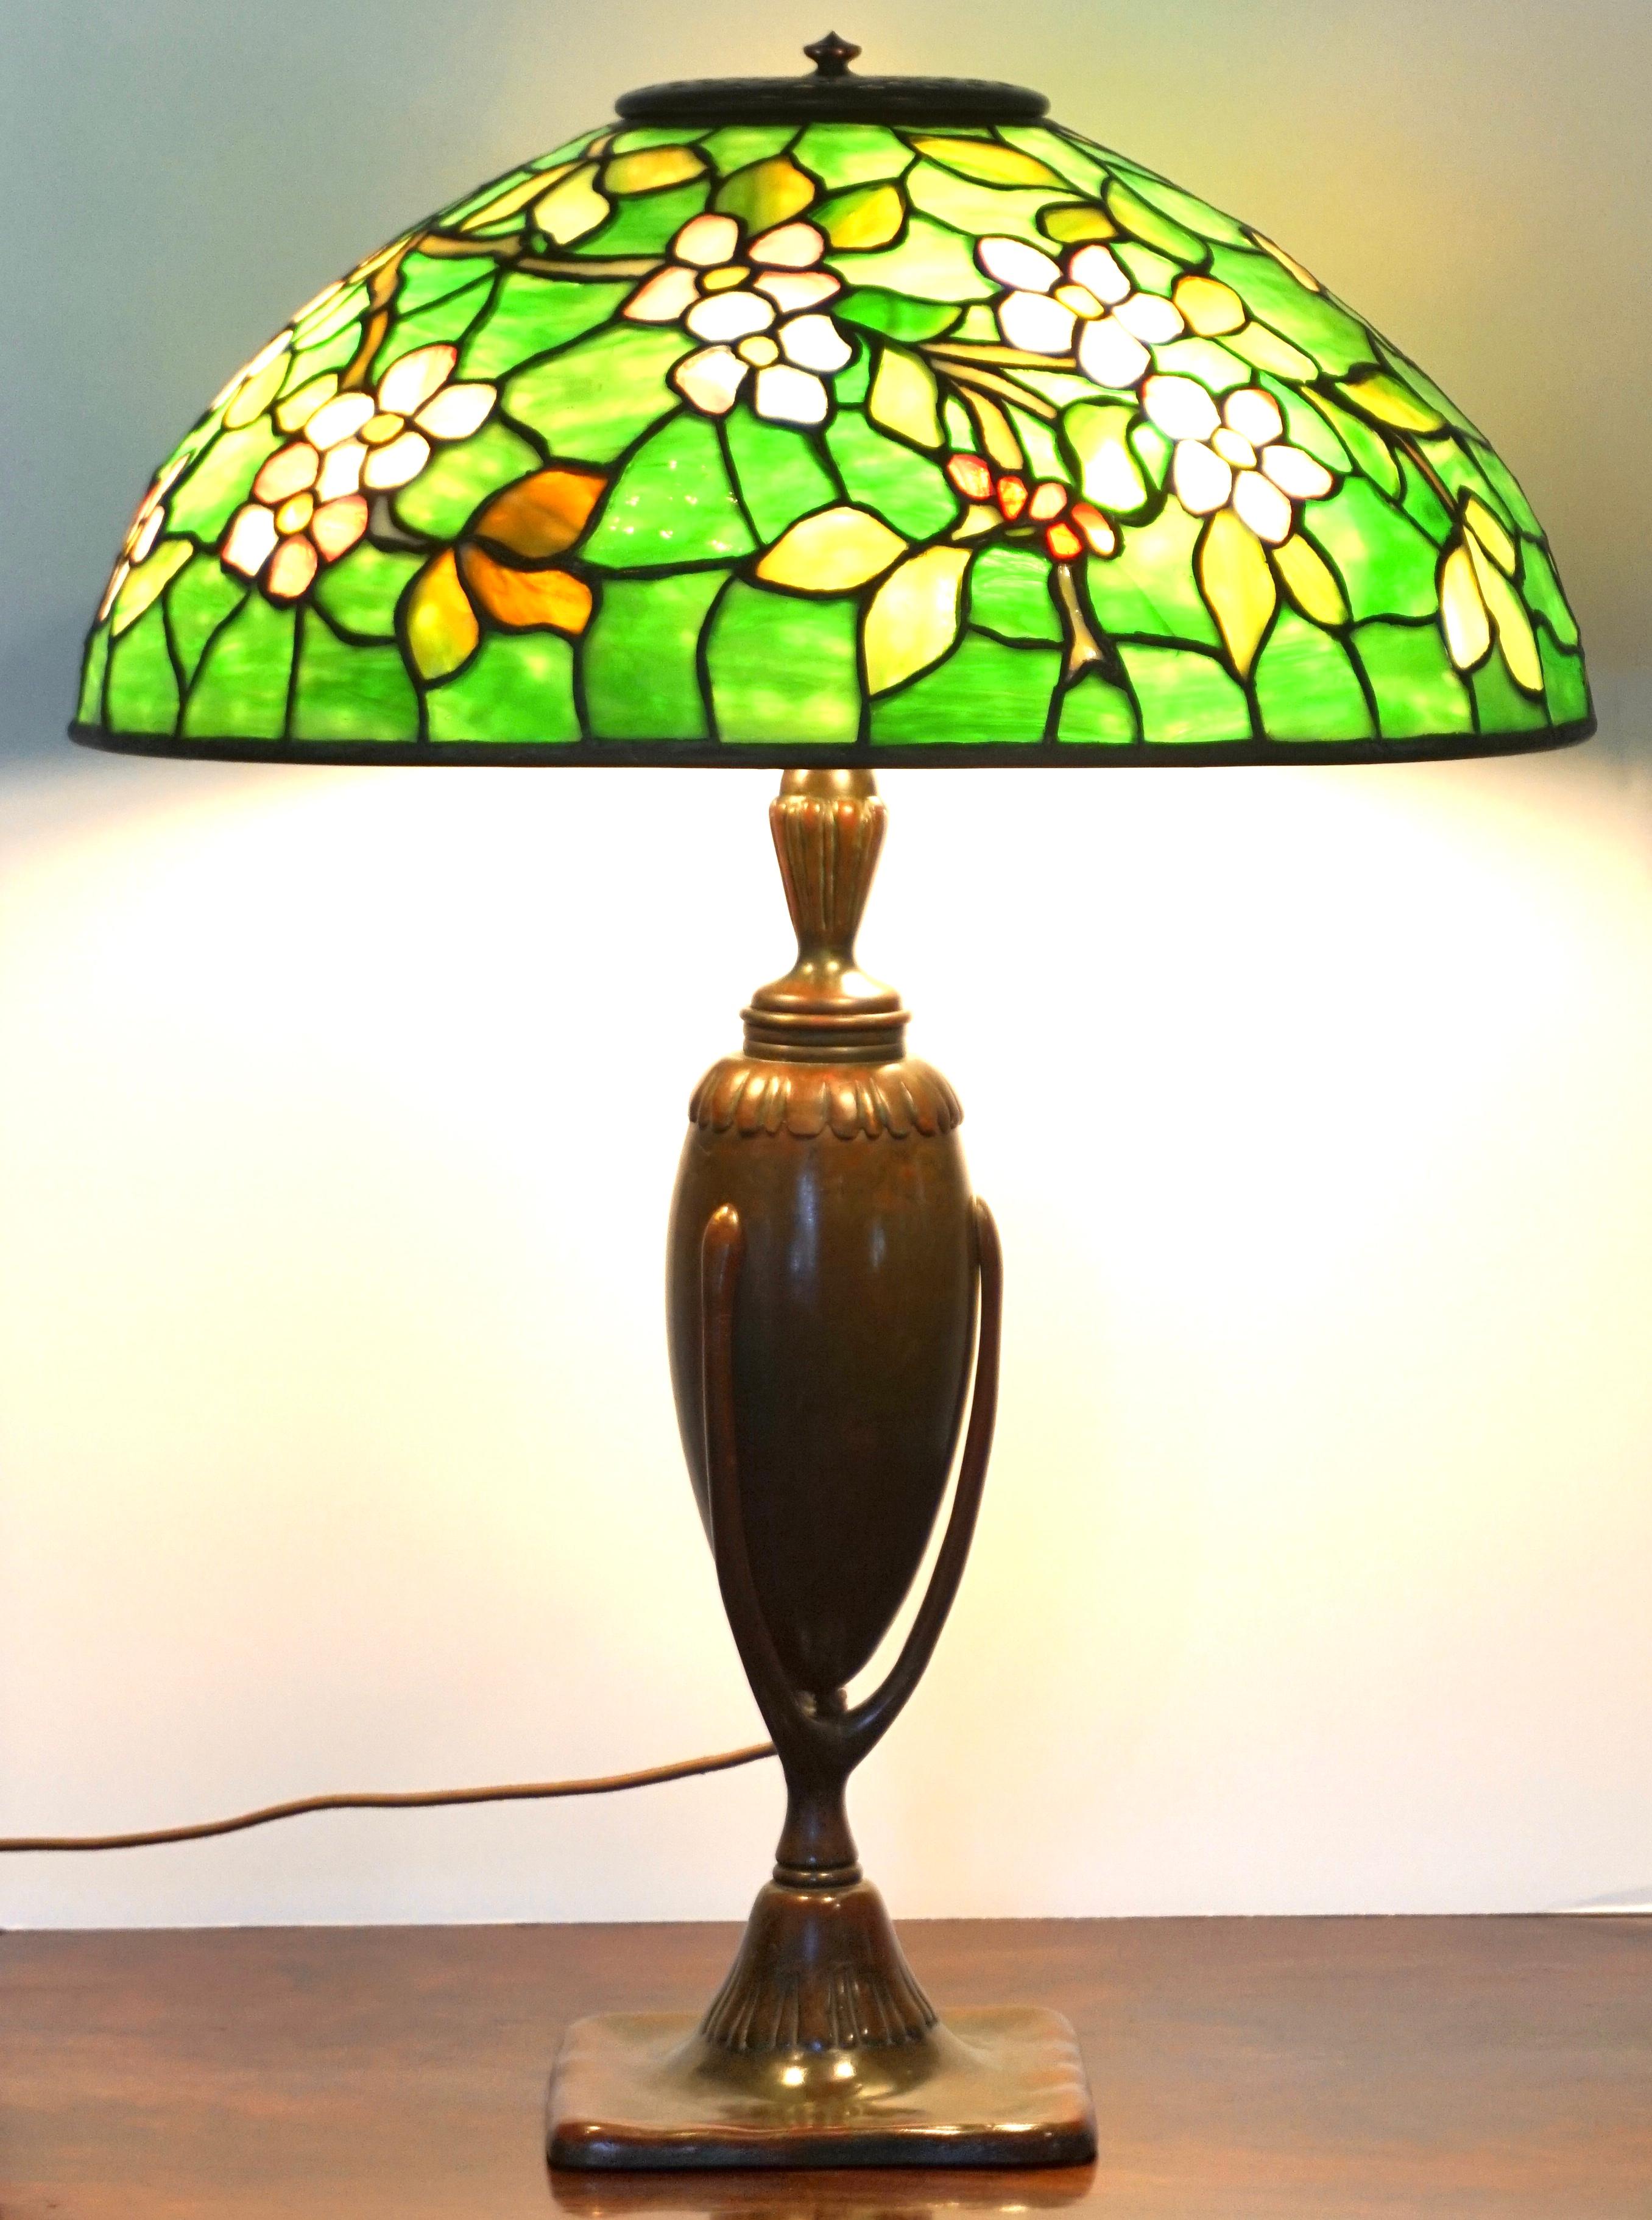 A fine Tiffany Favrile glass and bronze apple blossom table lamp, Tiffany Studios, New York, circa 1910 Art Nouveau. The domical leaded glass shade with an overall pattern of apple blossoms in pink and white striated opalescent glass, the leaves and